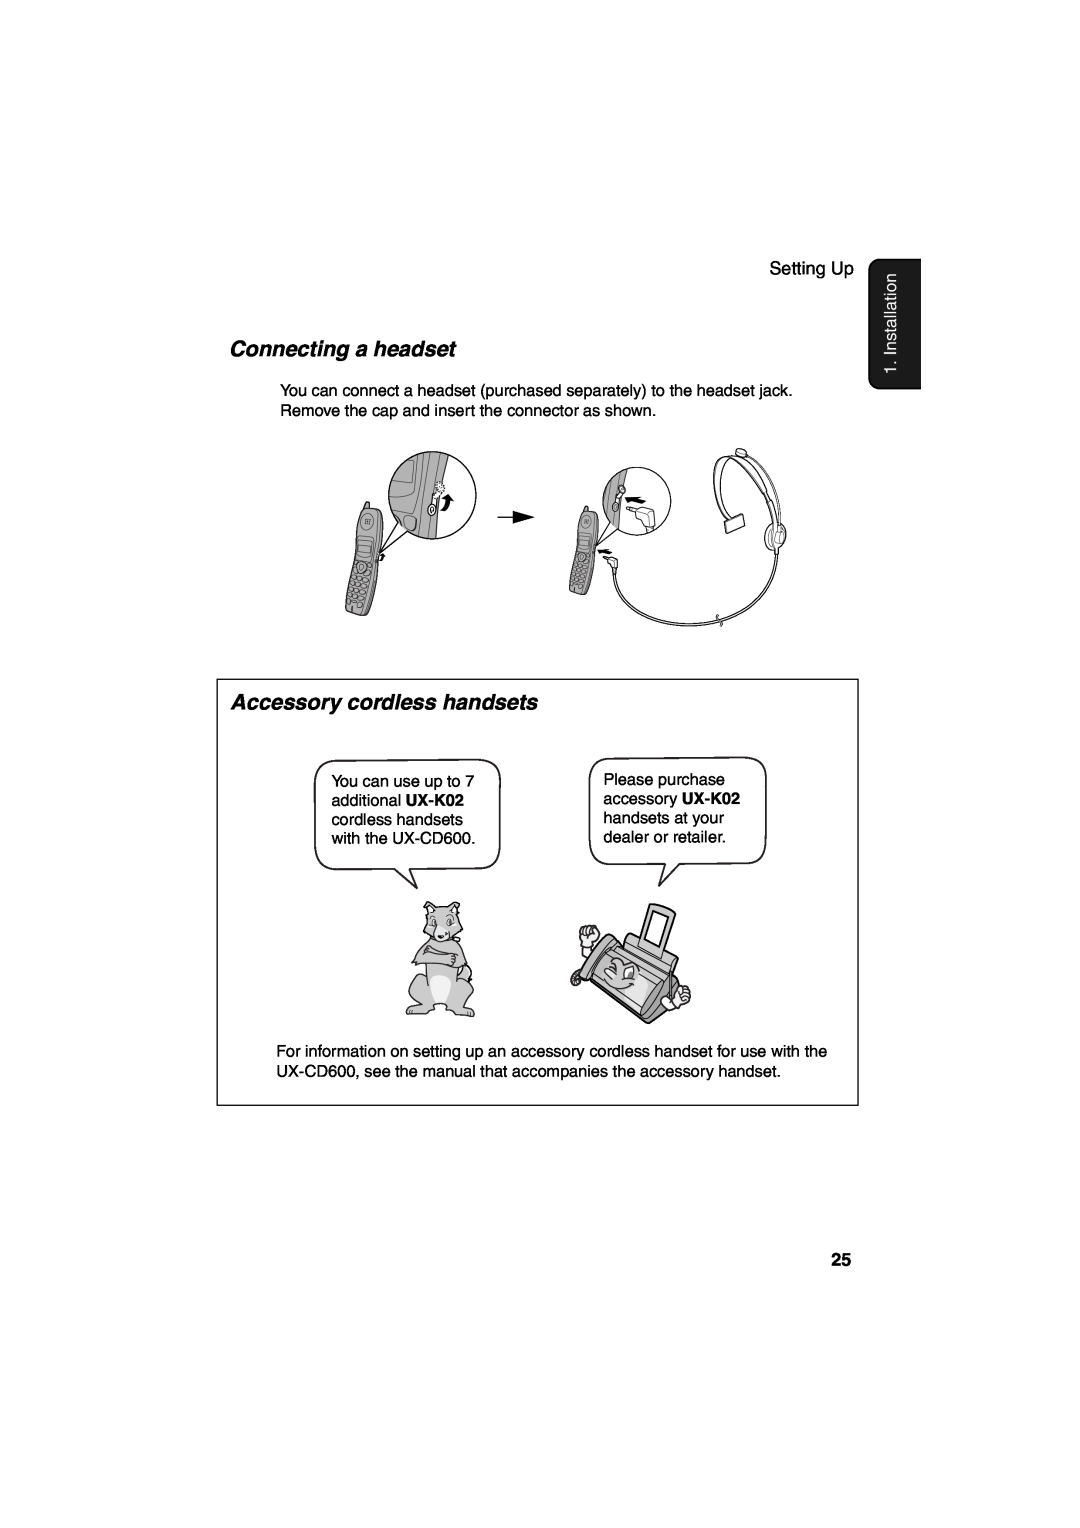 Sharp UX-CD600 operation manual Connecting a headset, Accessory cordless handsets, Installation 